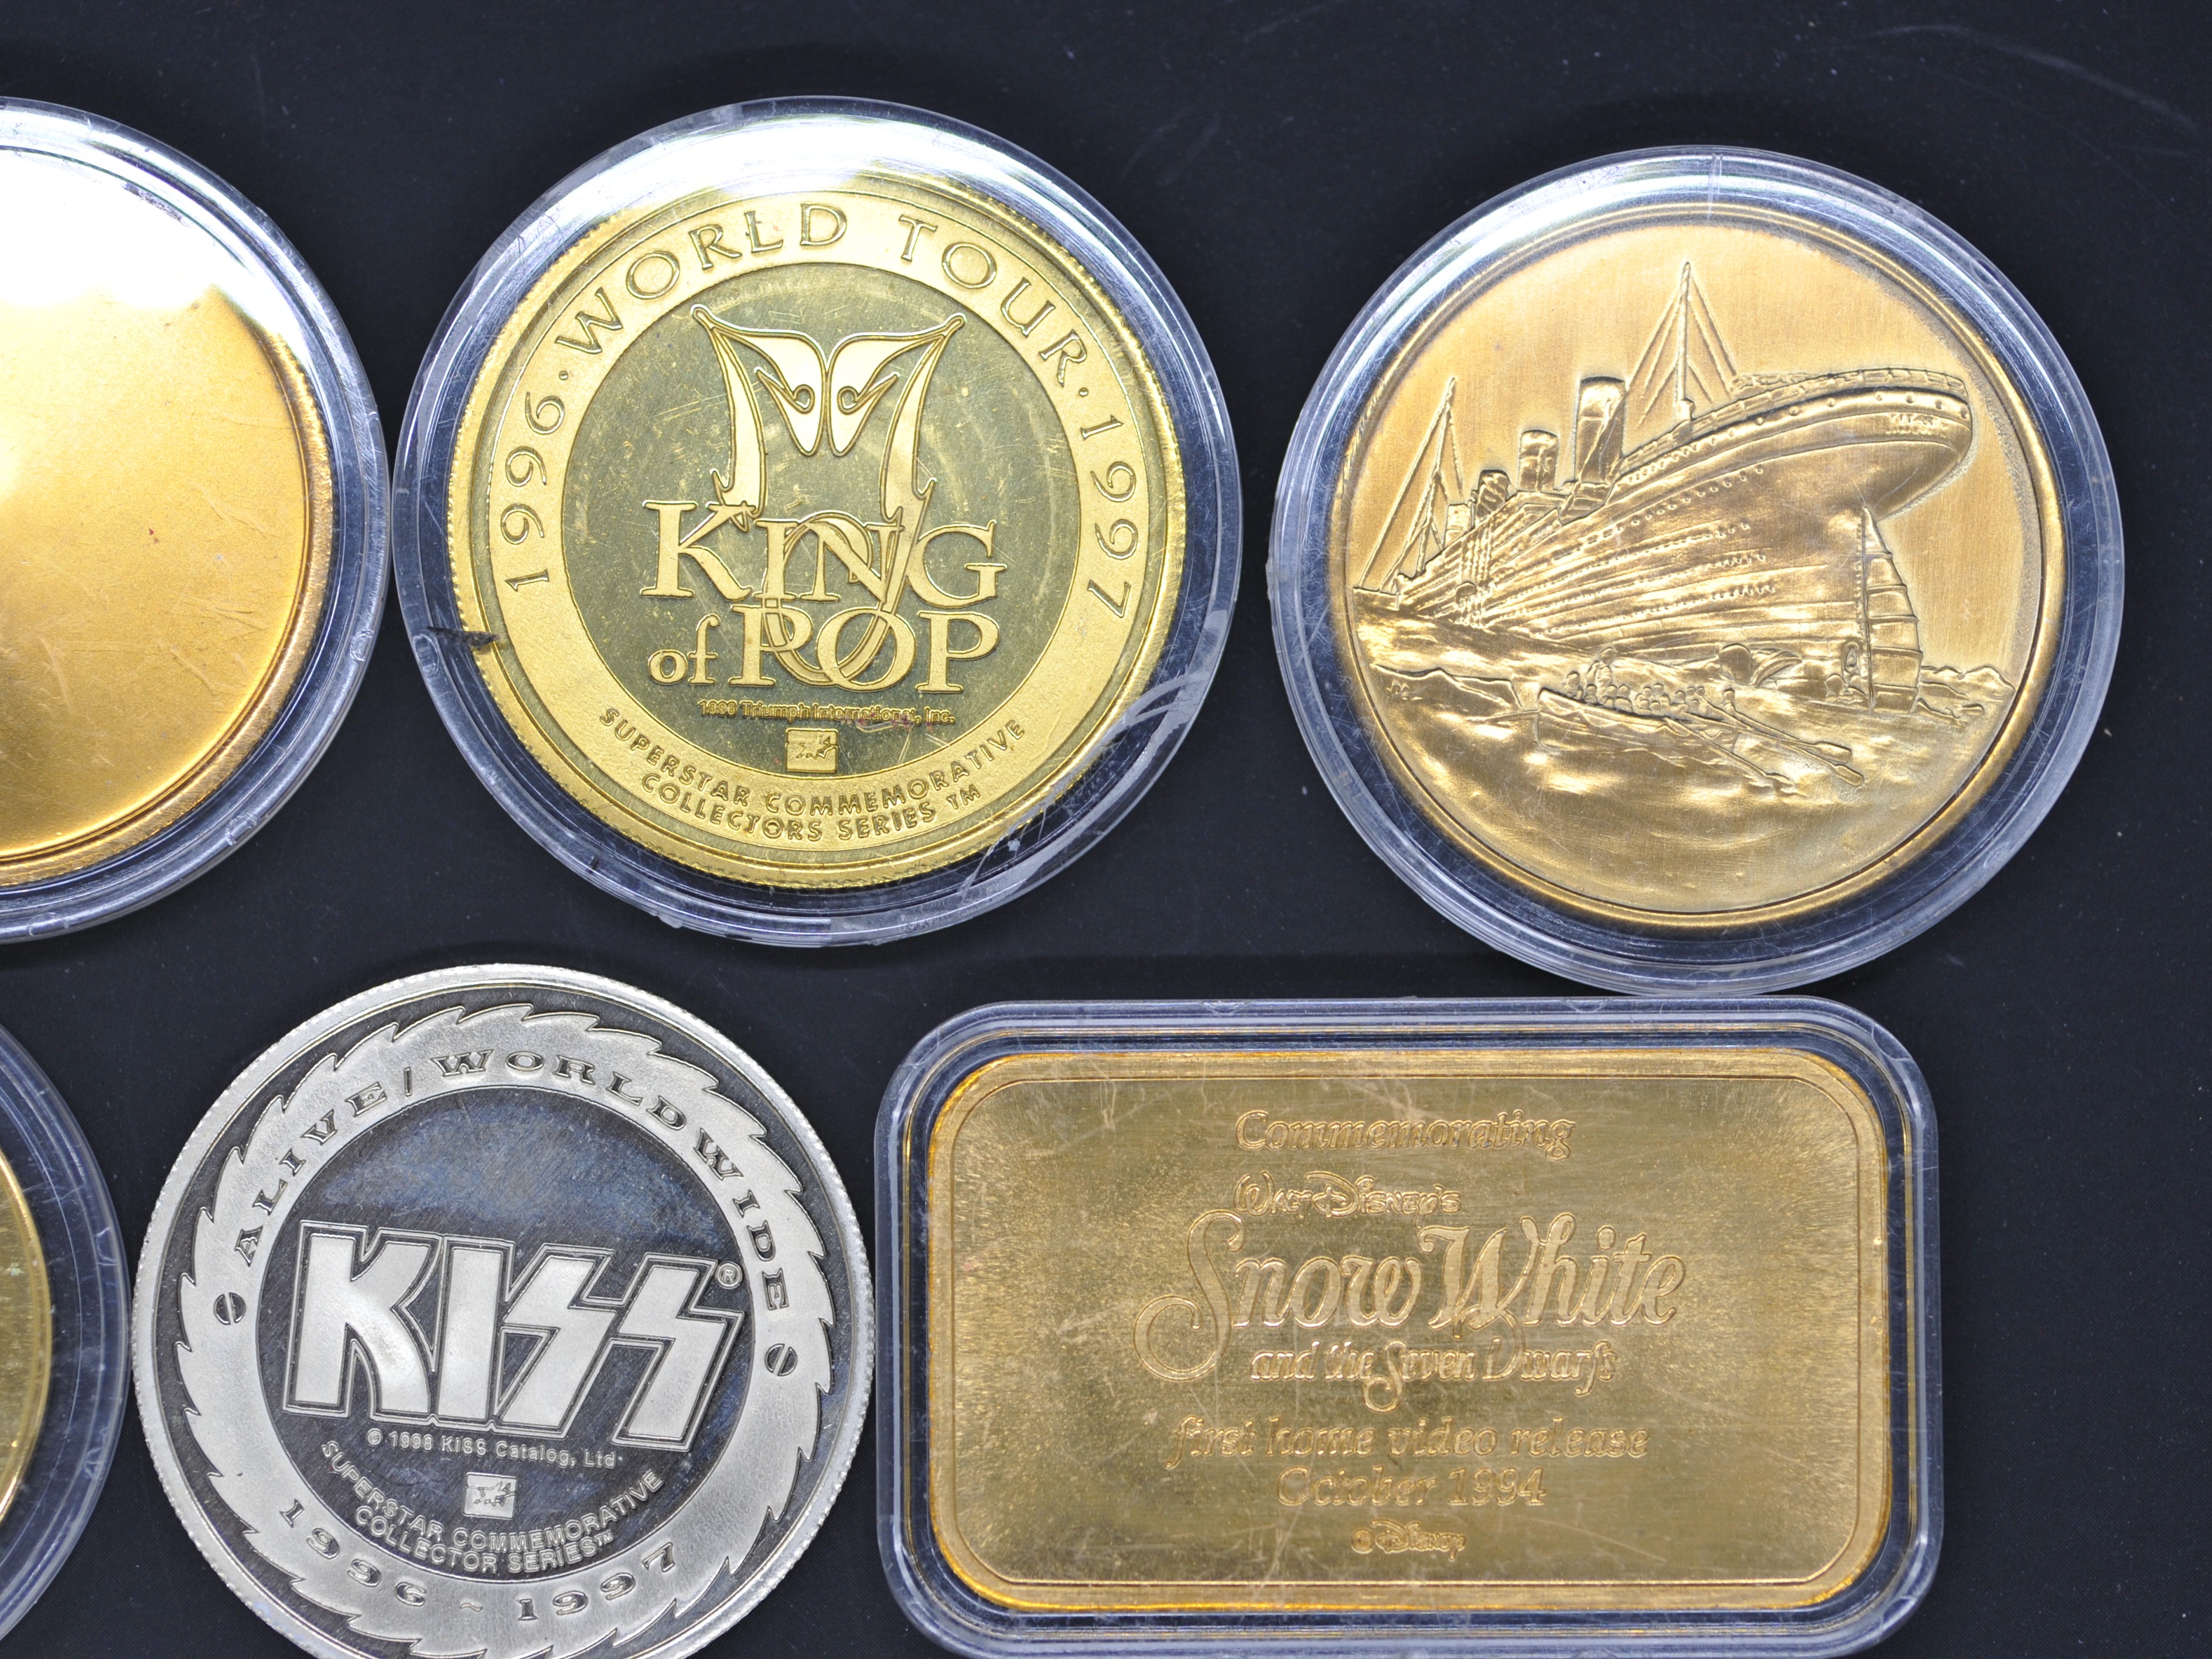 Collectable- Eight collectible coins / medallions struck by Liberty mint in the USA. - Image 2 of 5